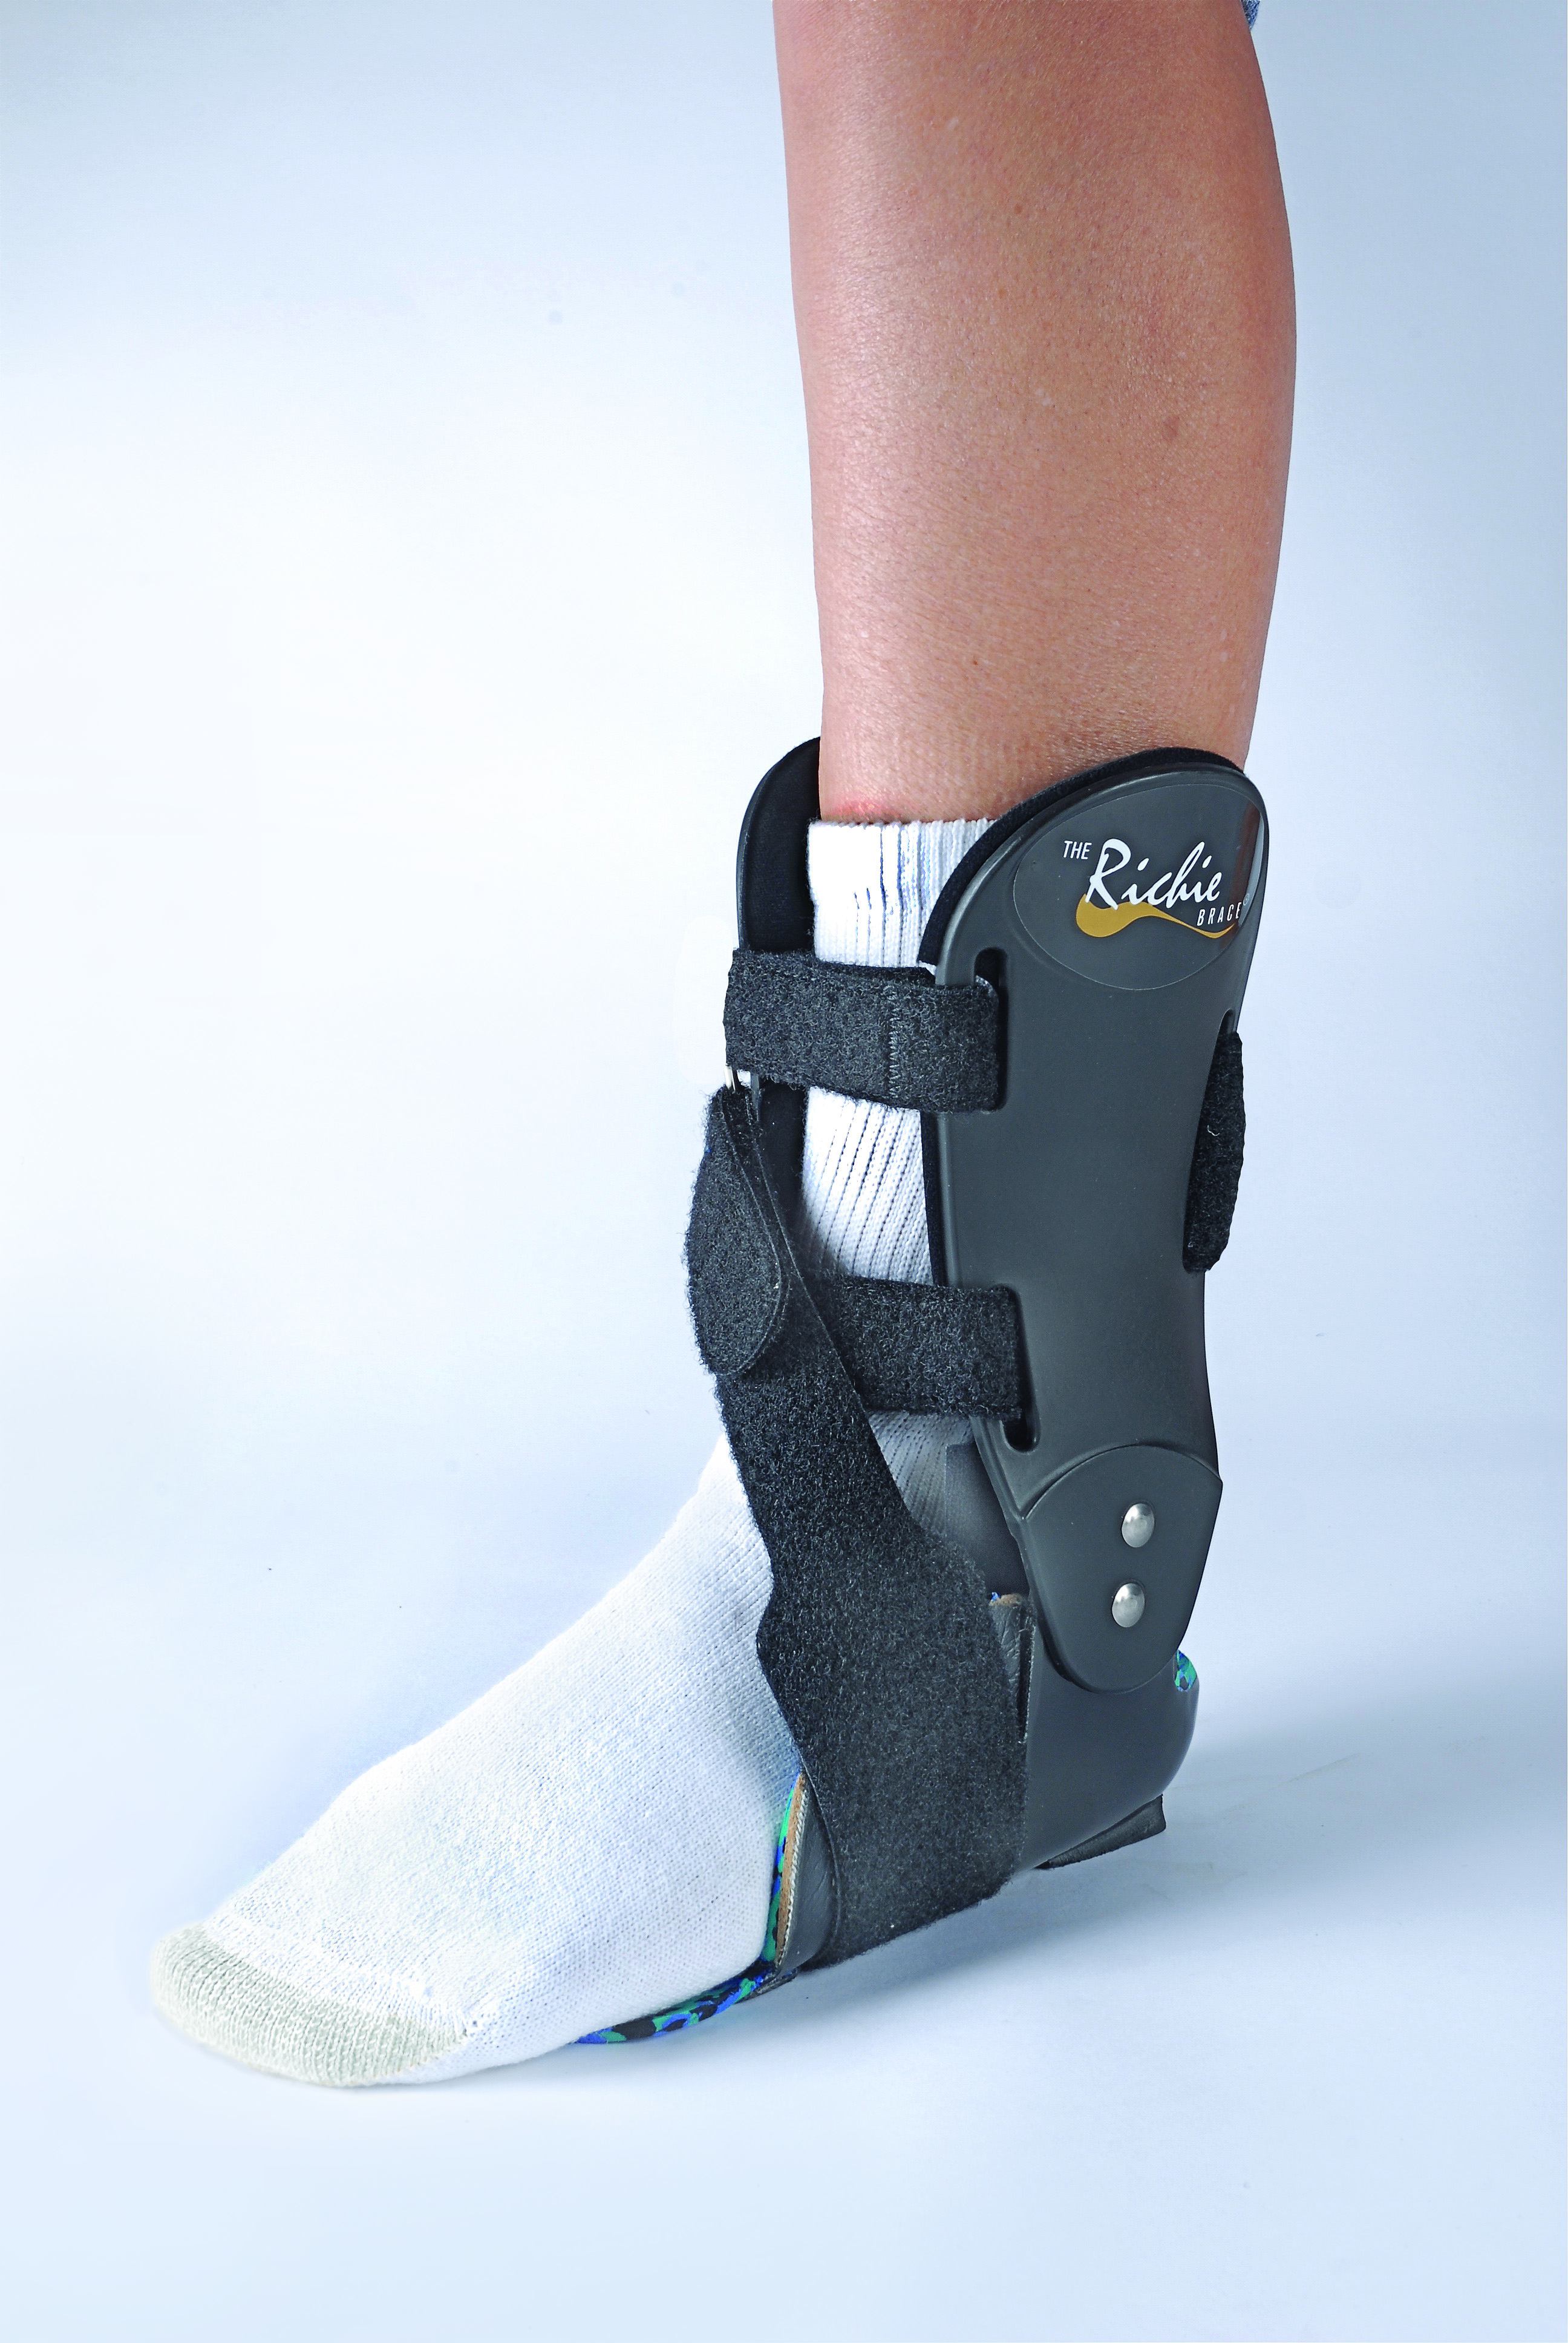 Sports Ankle Support Ankle Brace Guard Foot Protector Basketball Football  Hiking